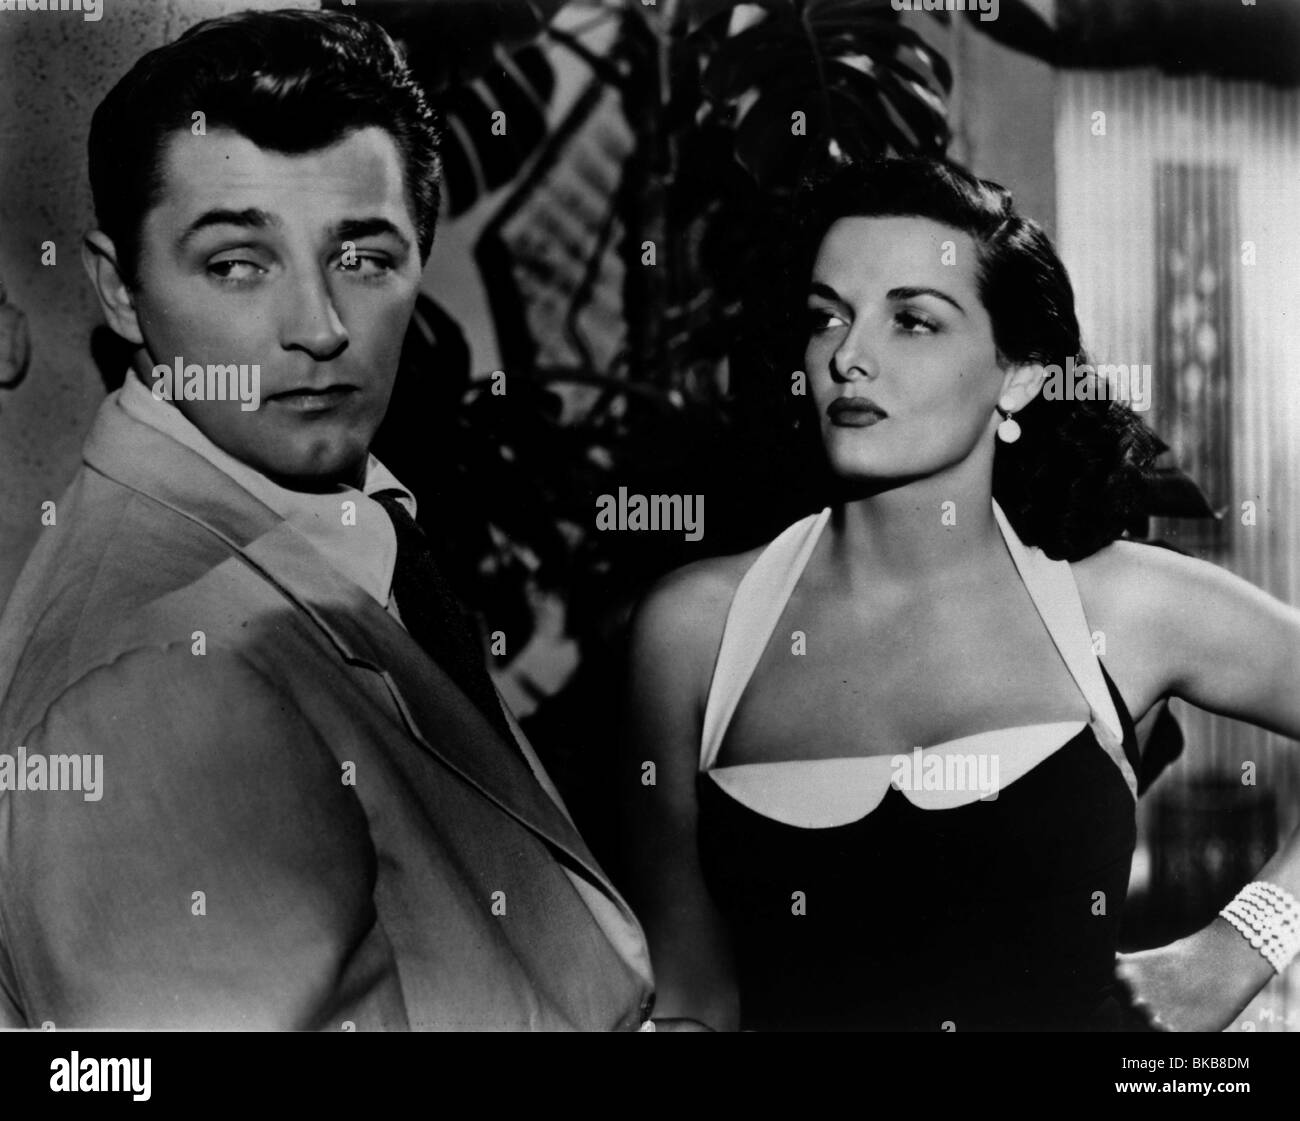 HIS KIND OF WOMAN (1951) ROBERT MITCHUM, JANE RUSSELL HKWM 001P Stock Photo